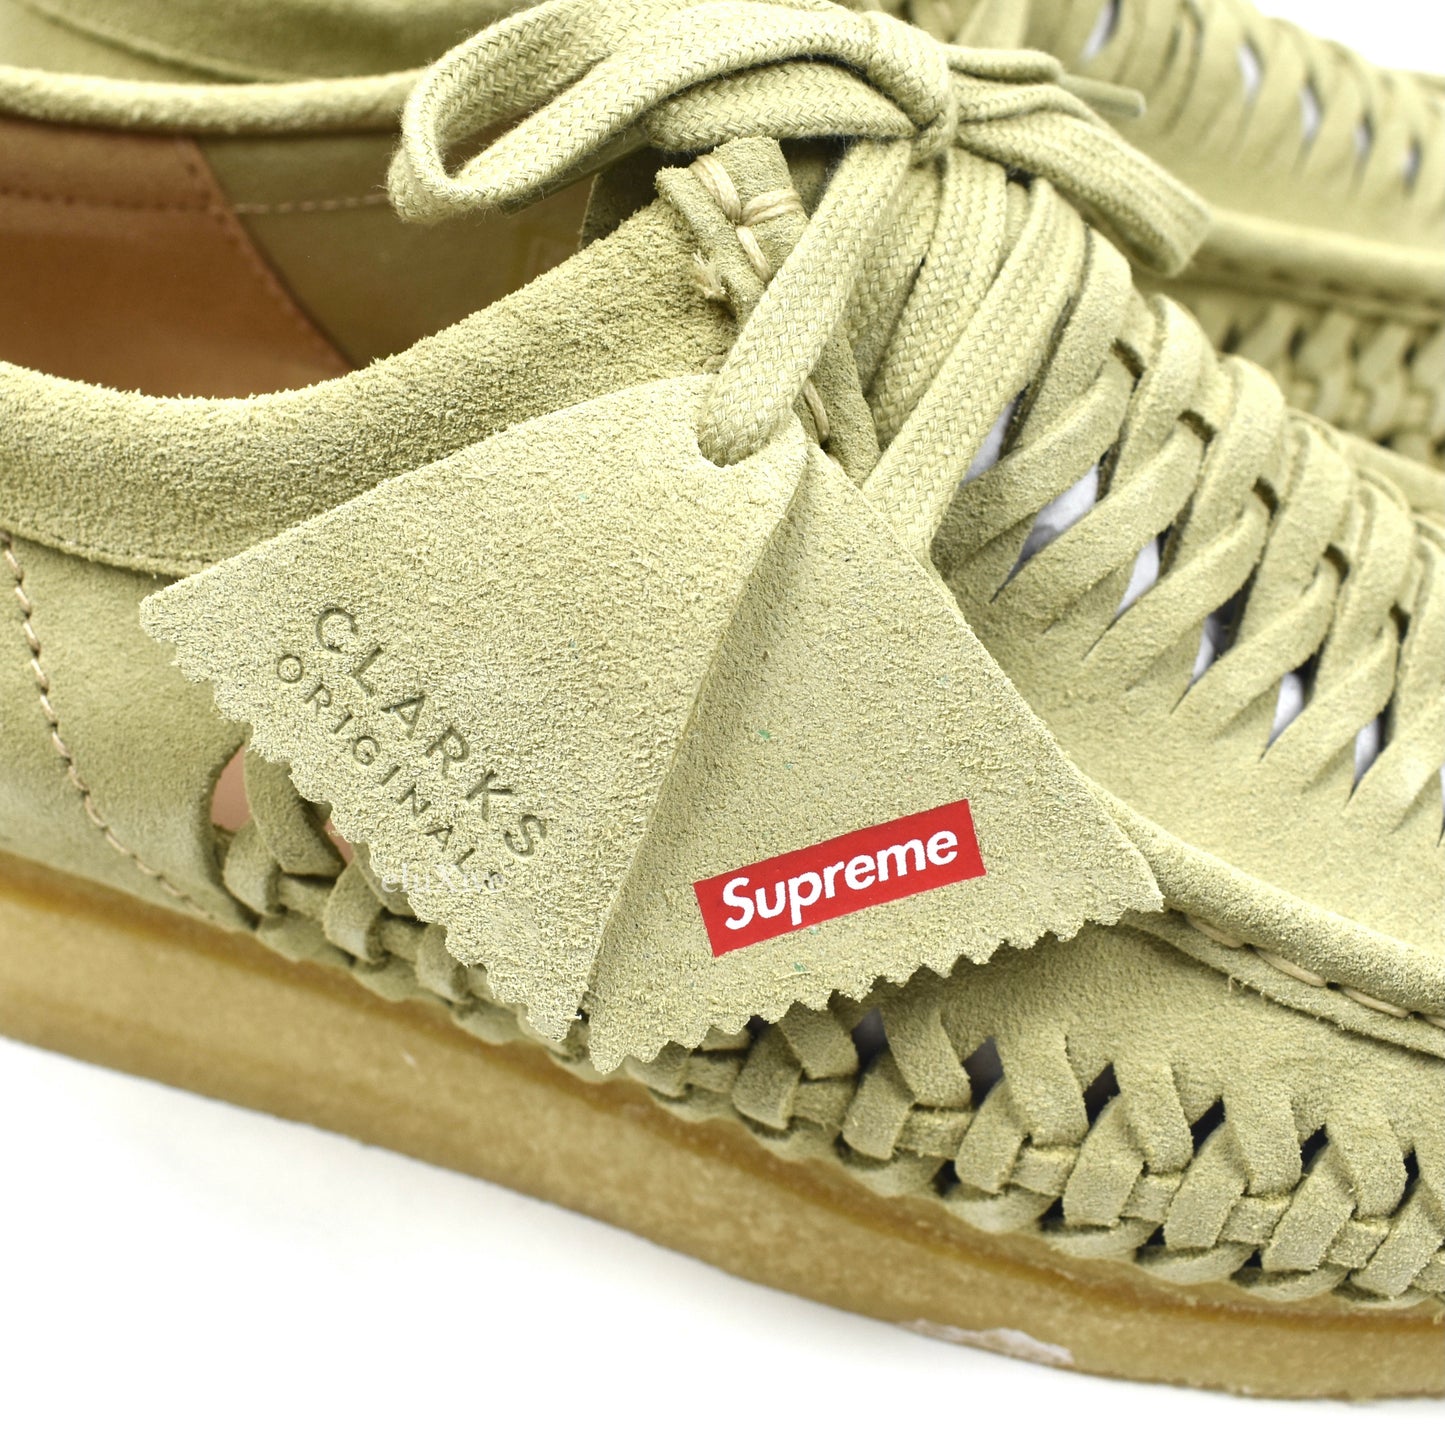 Supreme x Clarks - Maple Suede Wallabee Weave Shoes